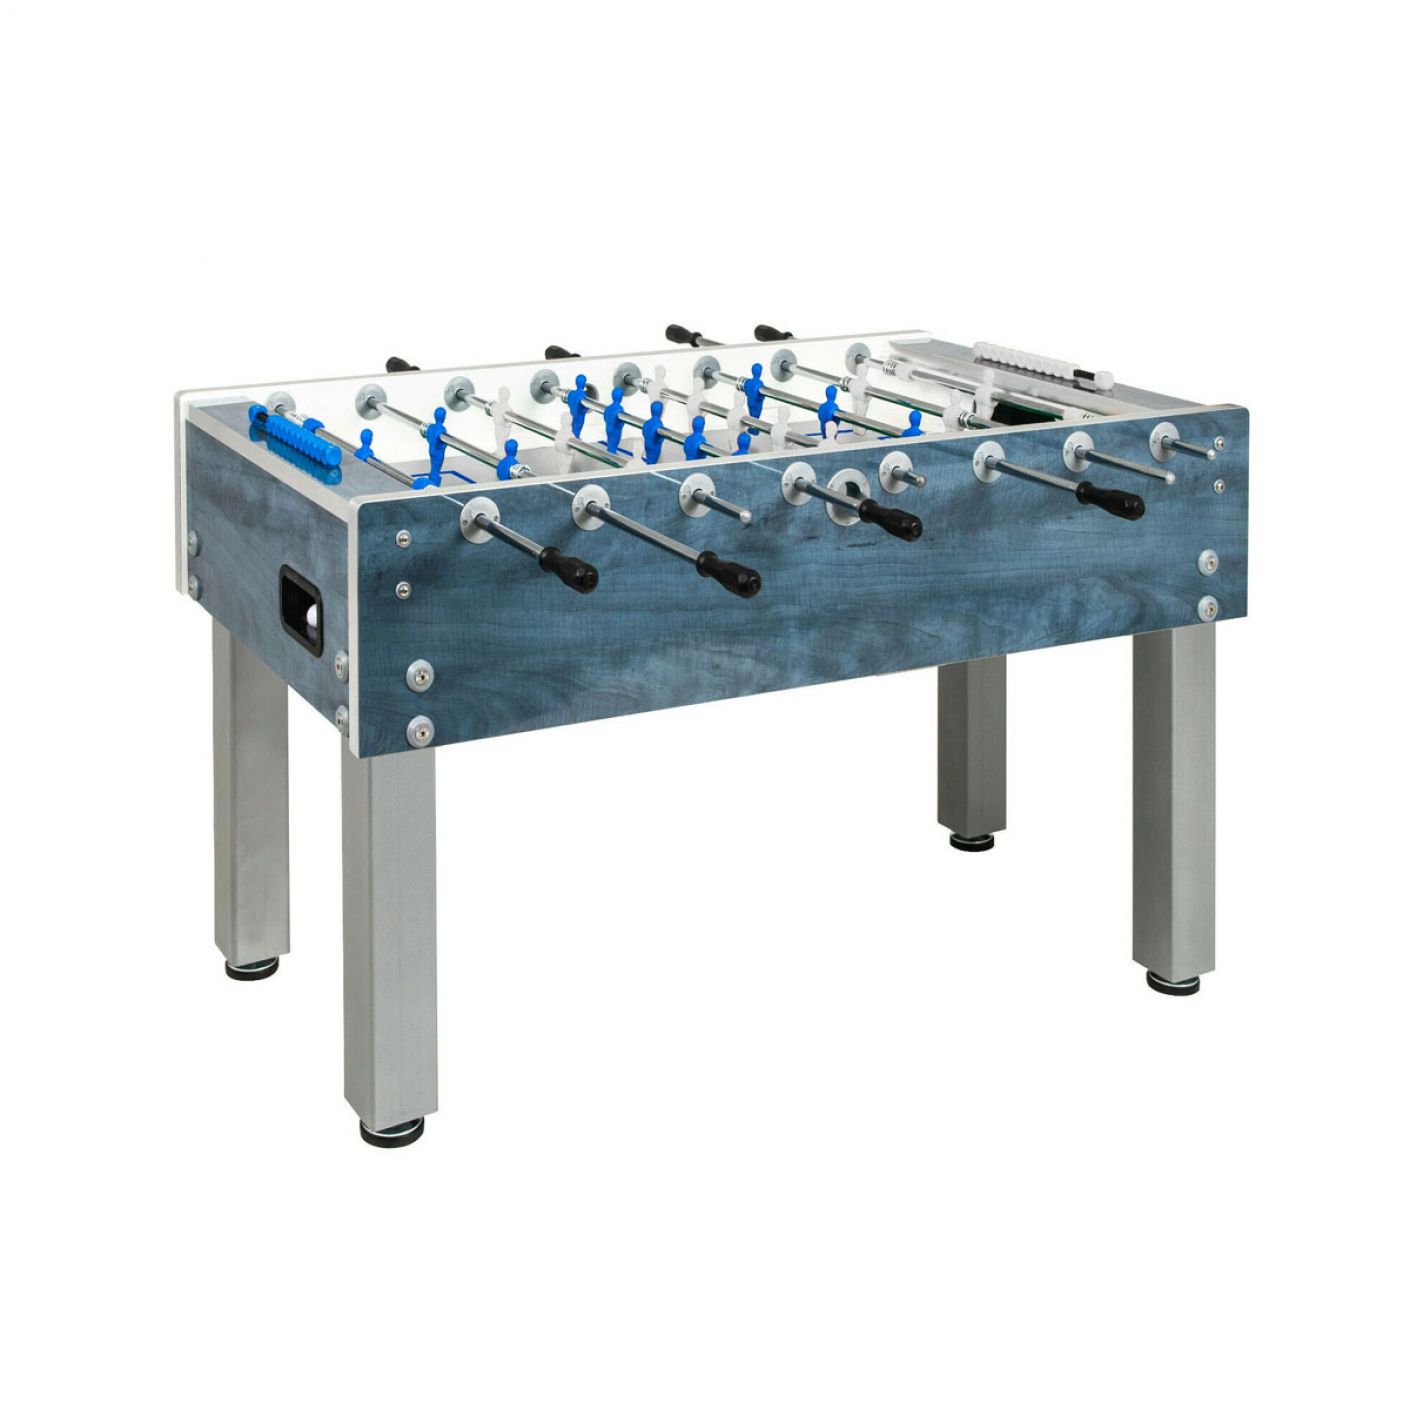 Garlando Football Table G-500 Weatherproof blue with outgoing temples